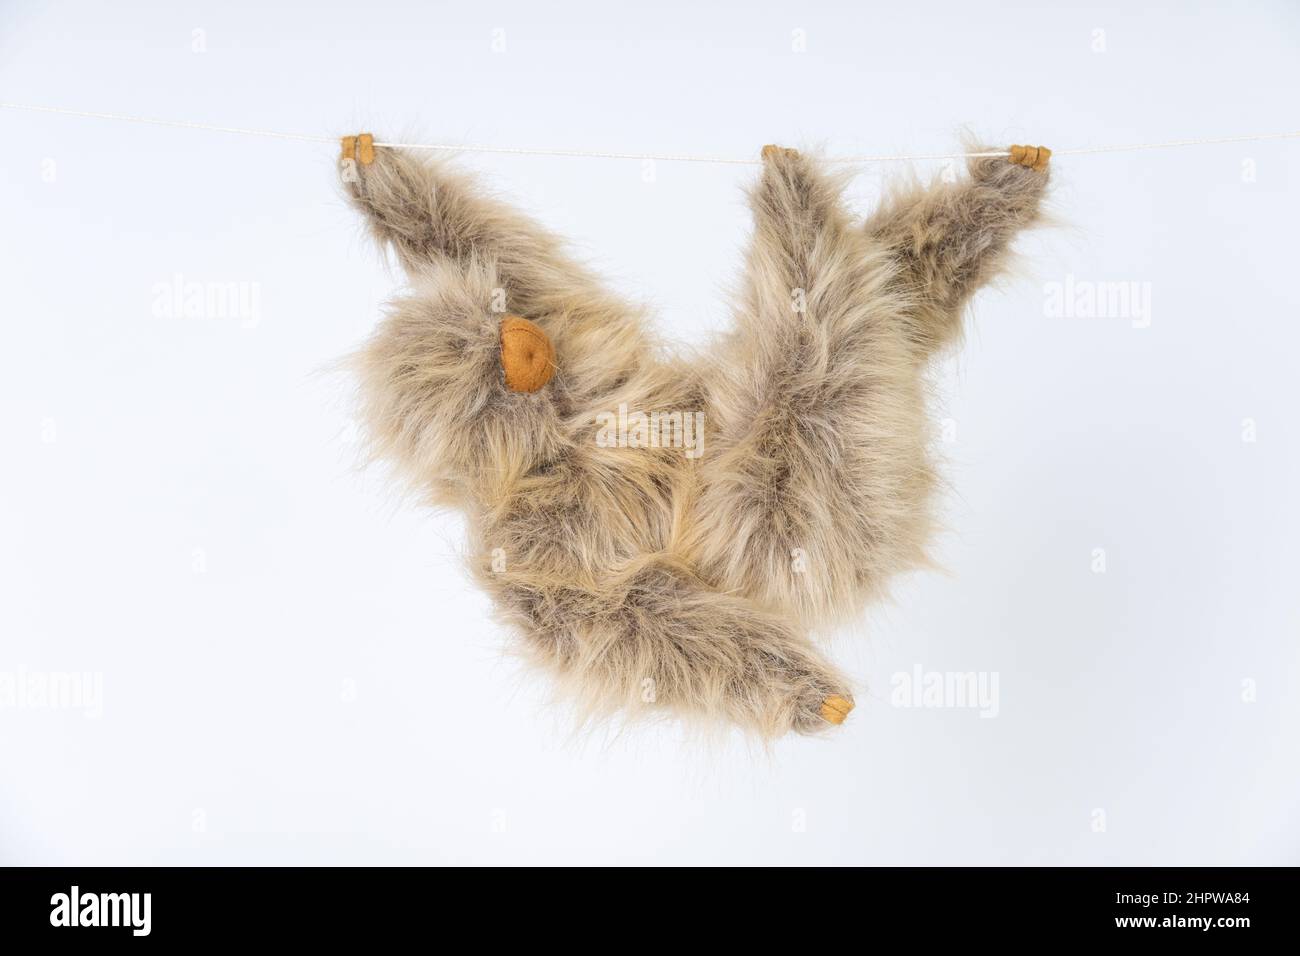 Stuffed animal Linnaeus's Two-toed Sloth hanging from a string Stock Photo